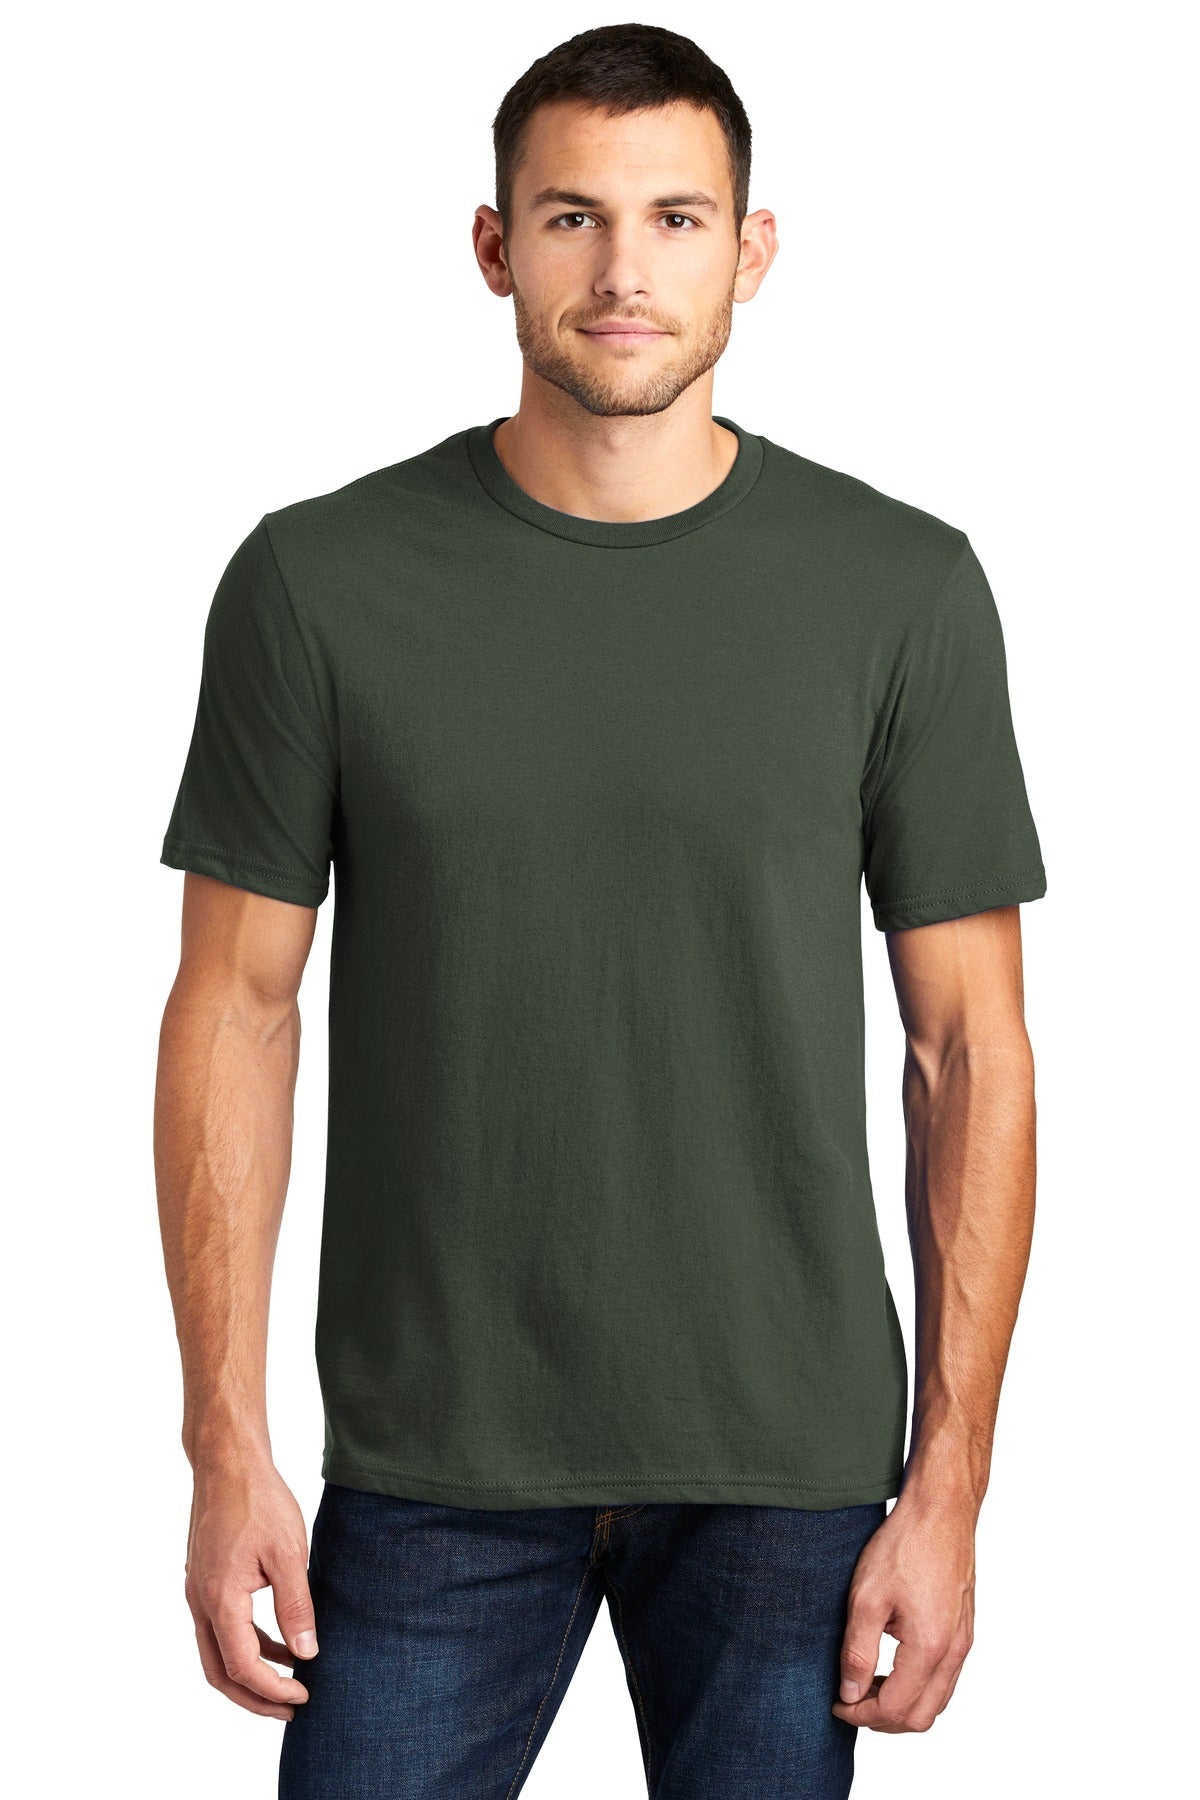 District® Very Important Tee®. DT6000 [Olive] - DFW Impression